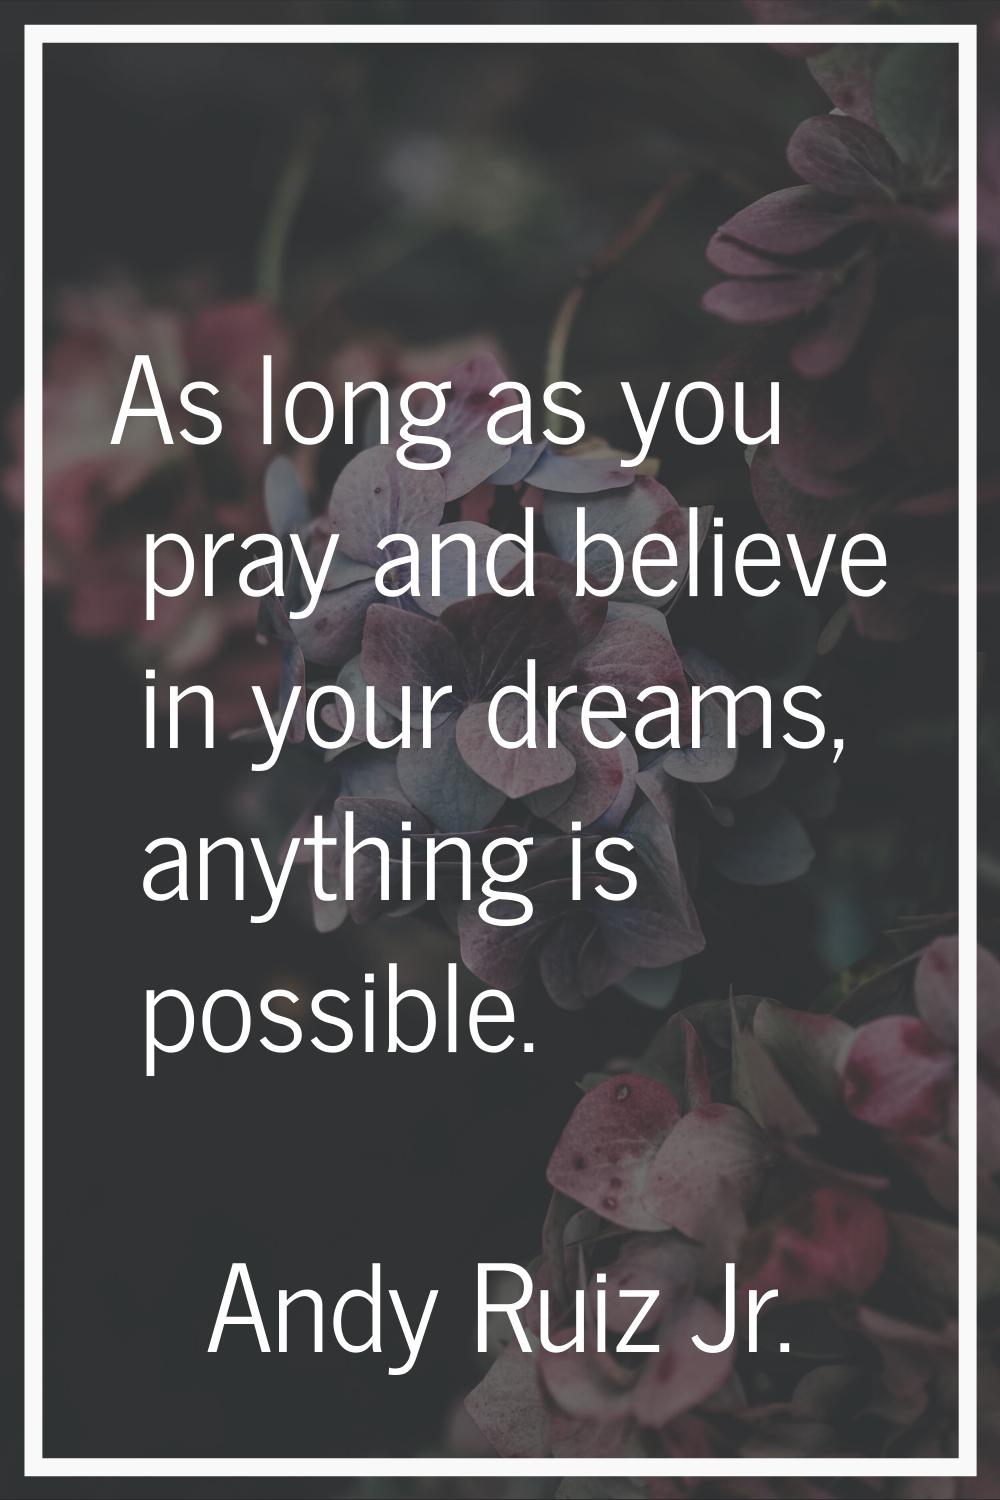 As long as you pray and believe in your dreams, anything is possible.